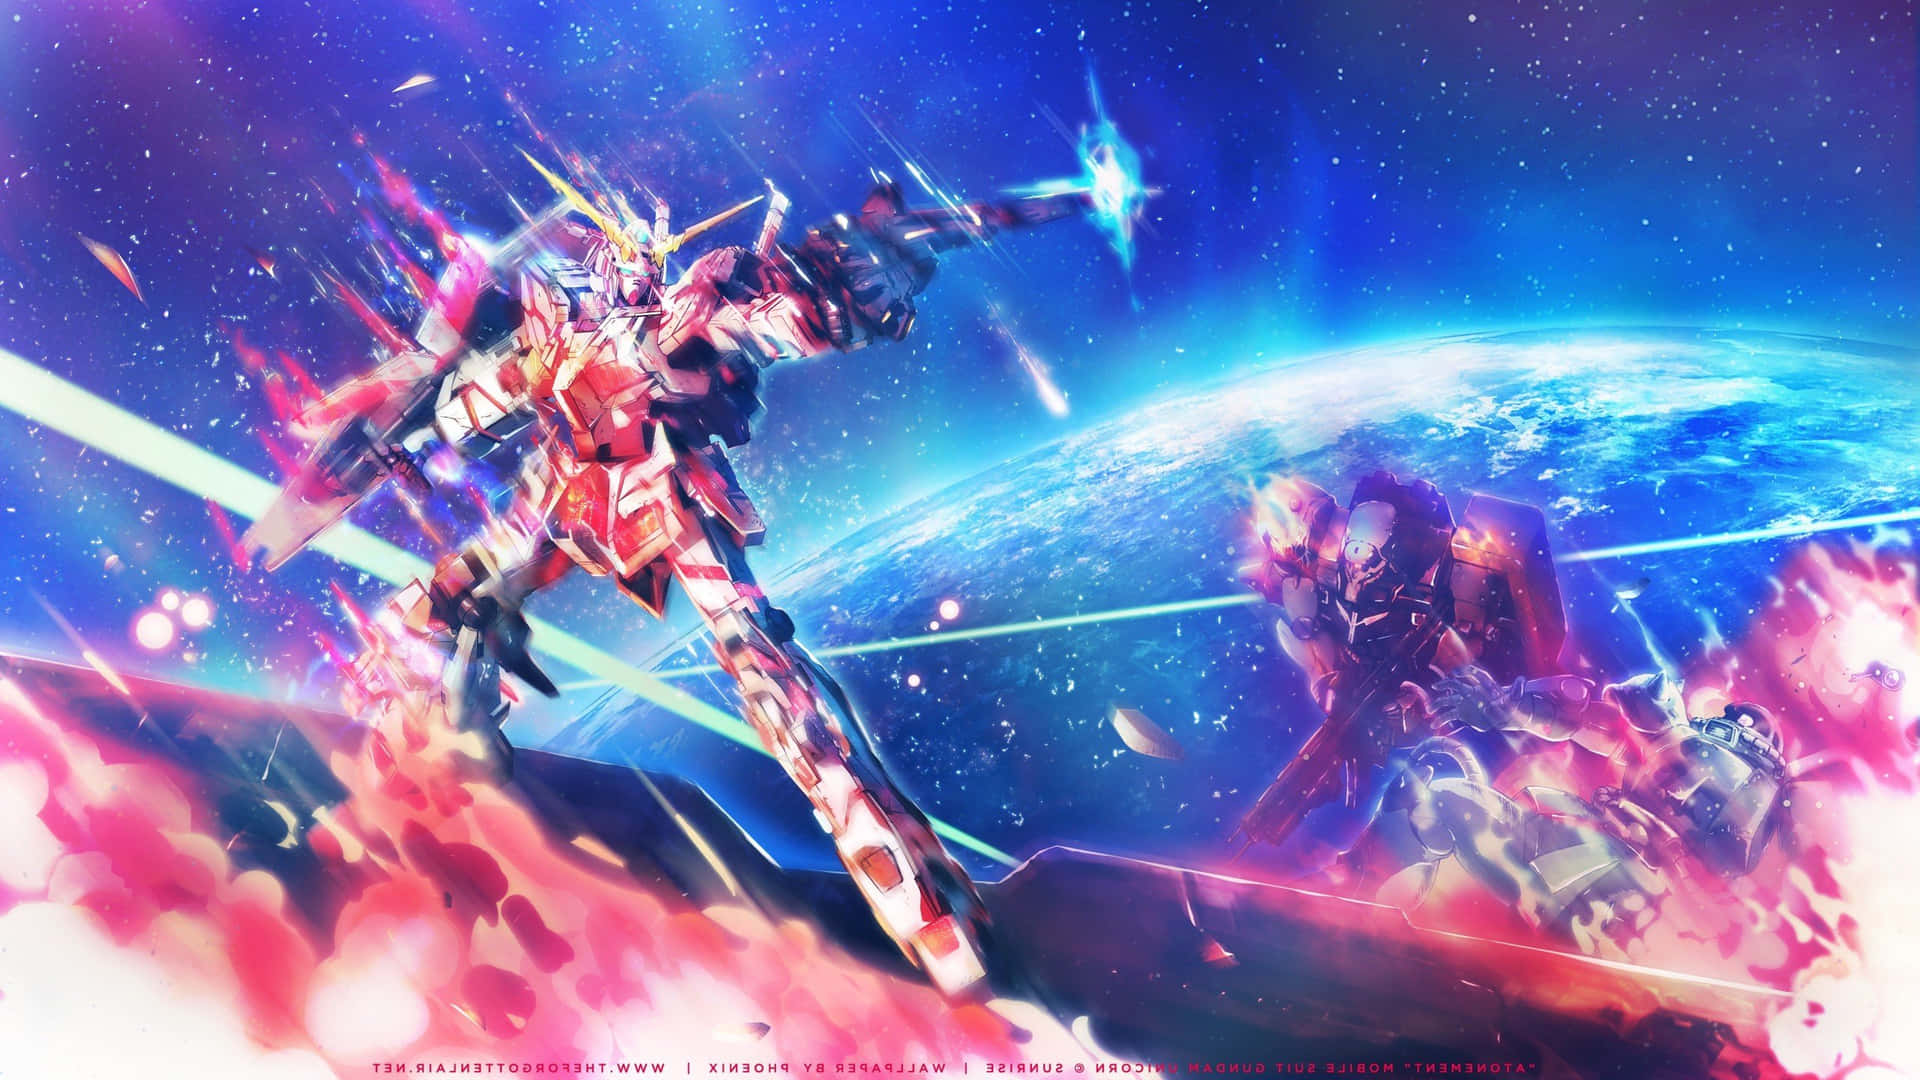 Stay up-to-date with your favorite anime by downloading a Gundam Desktop wallpaper Wallpaper